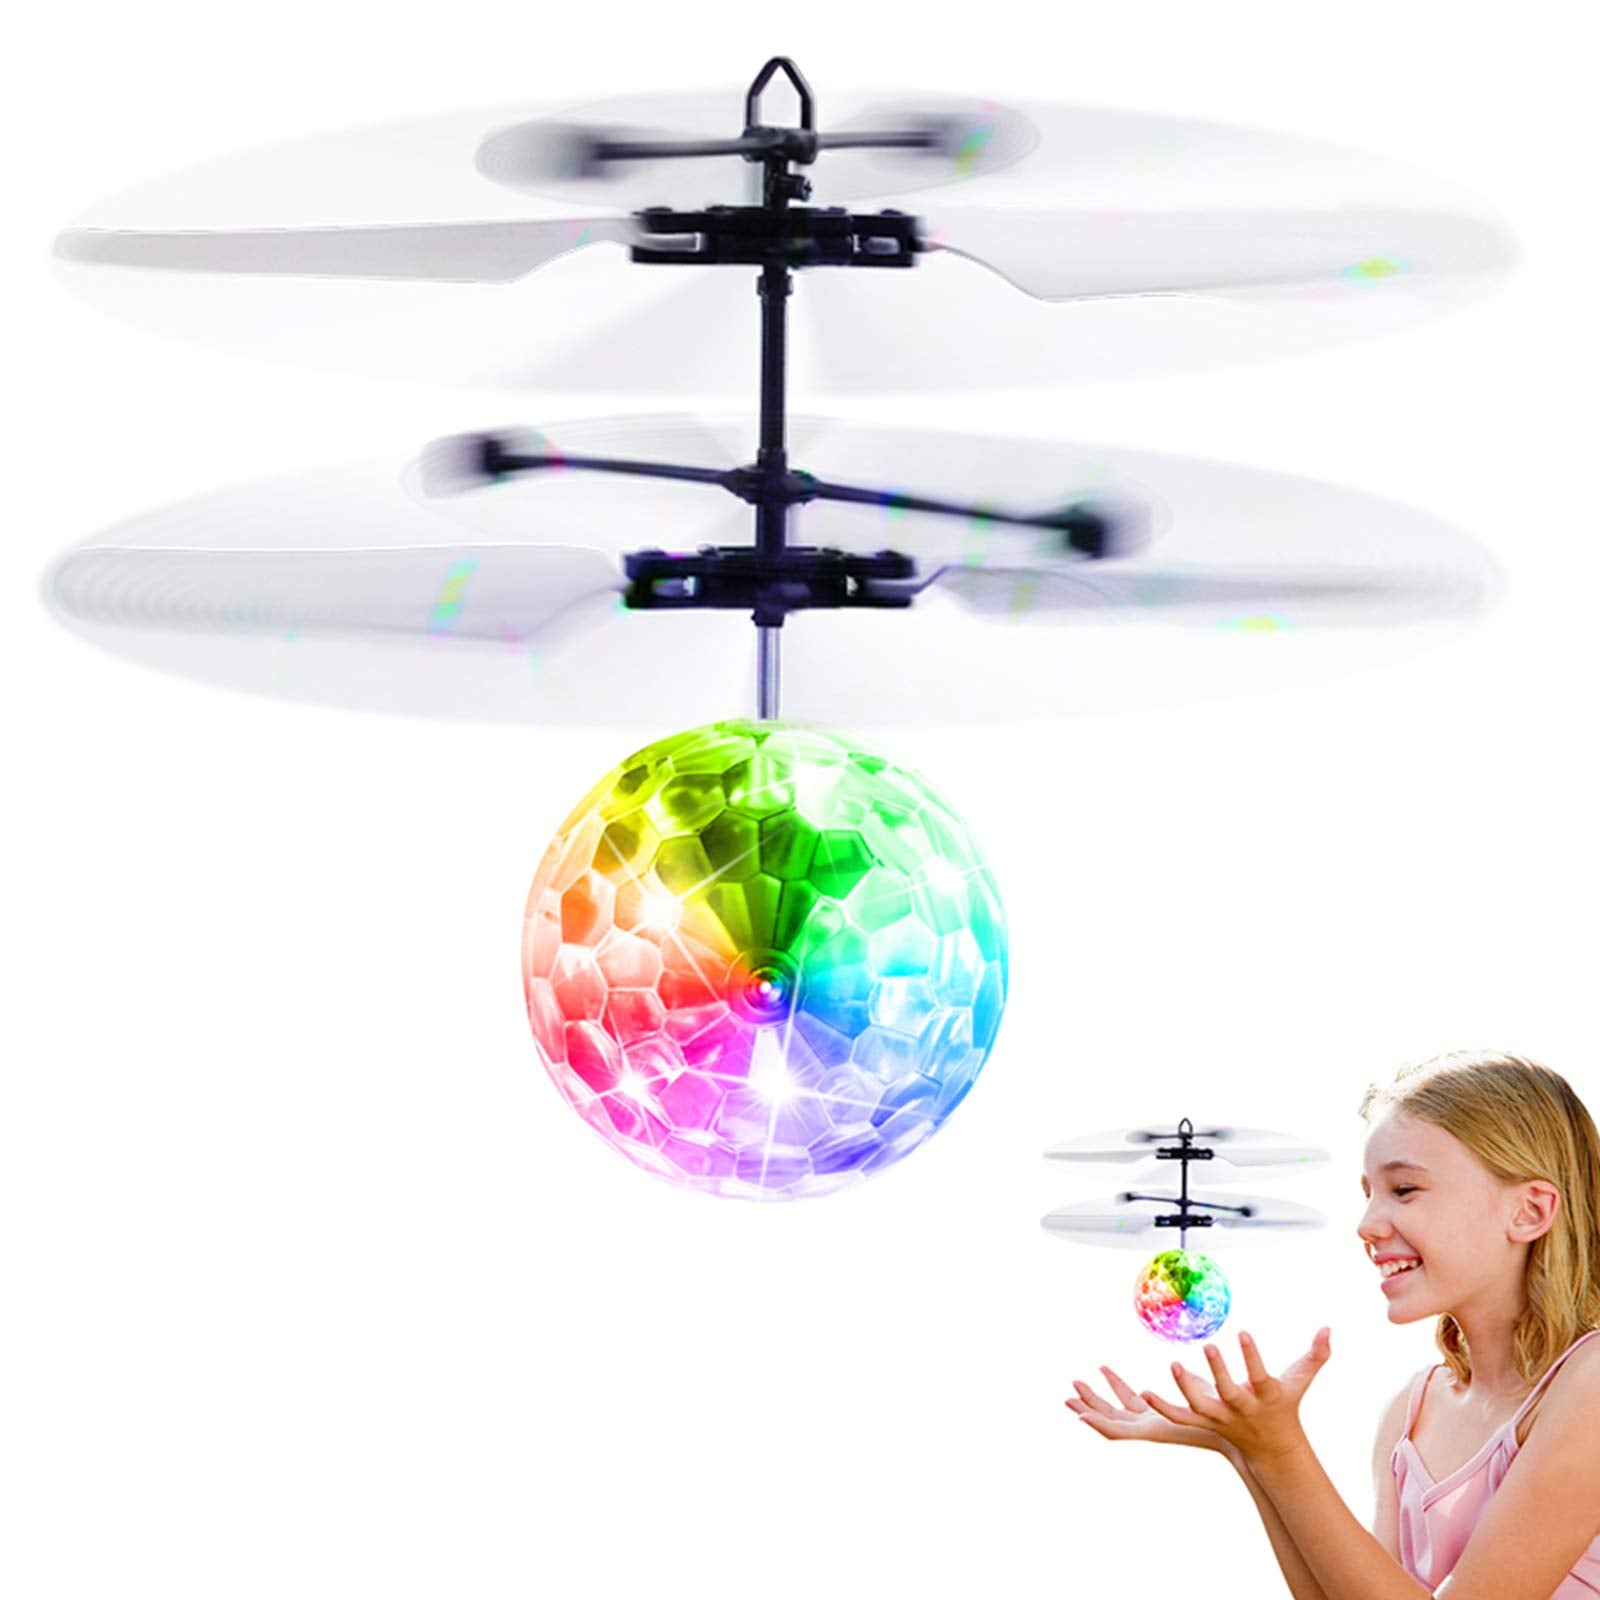 Betheaces Flying Ball Toys, RC Toy for Kids Boys Girls Gifts Rechargeable Light Up Ball Drone Infrared Induction Helicopter with Remote Controller for Indoor and Outdoor Games